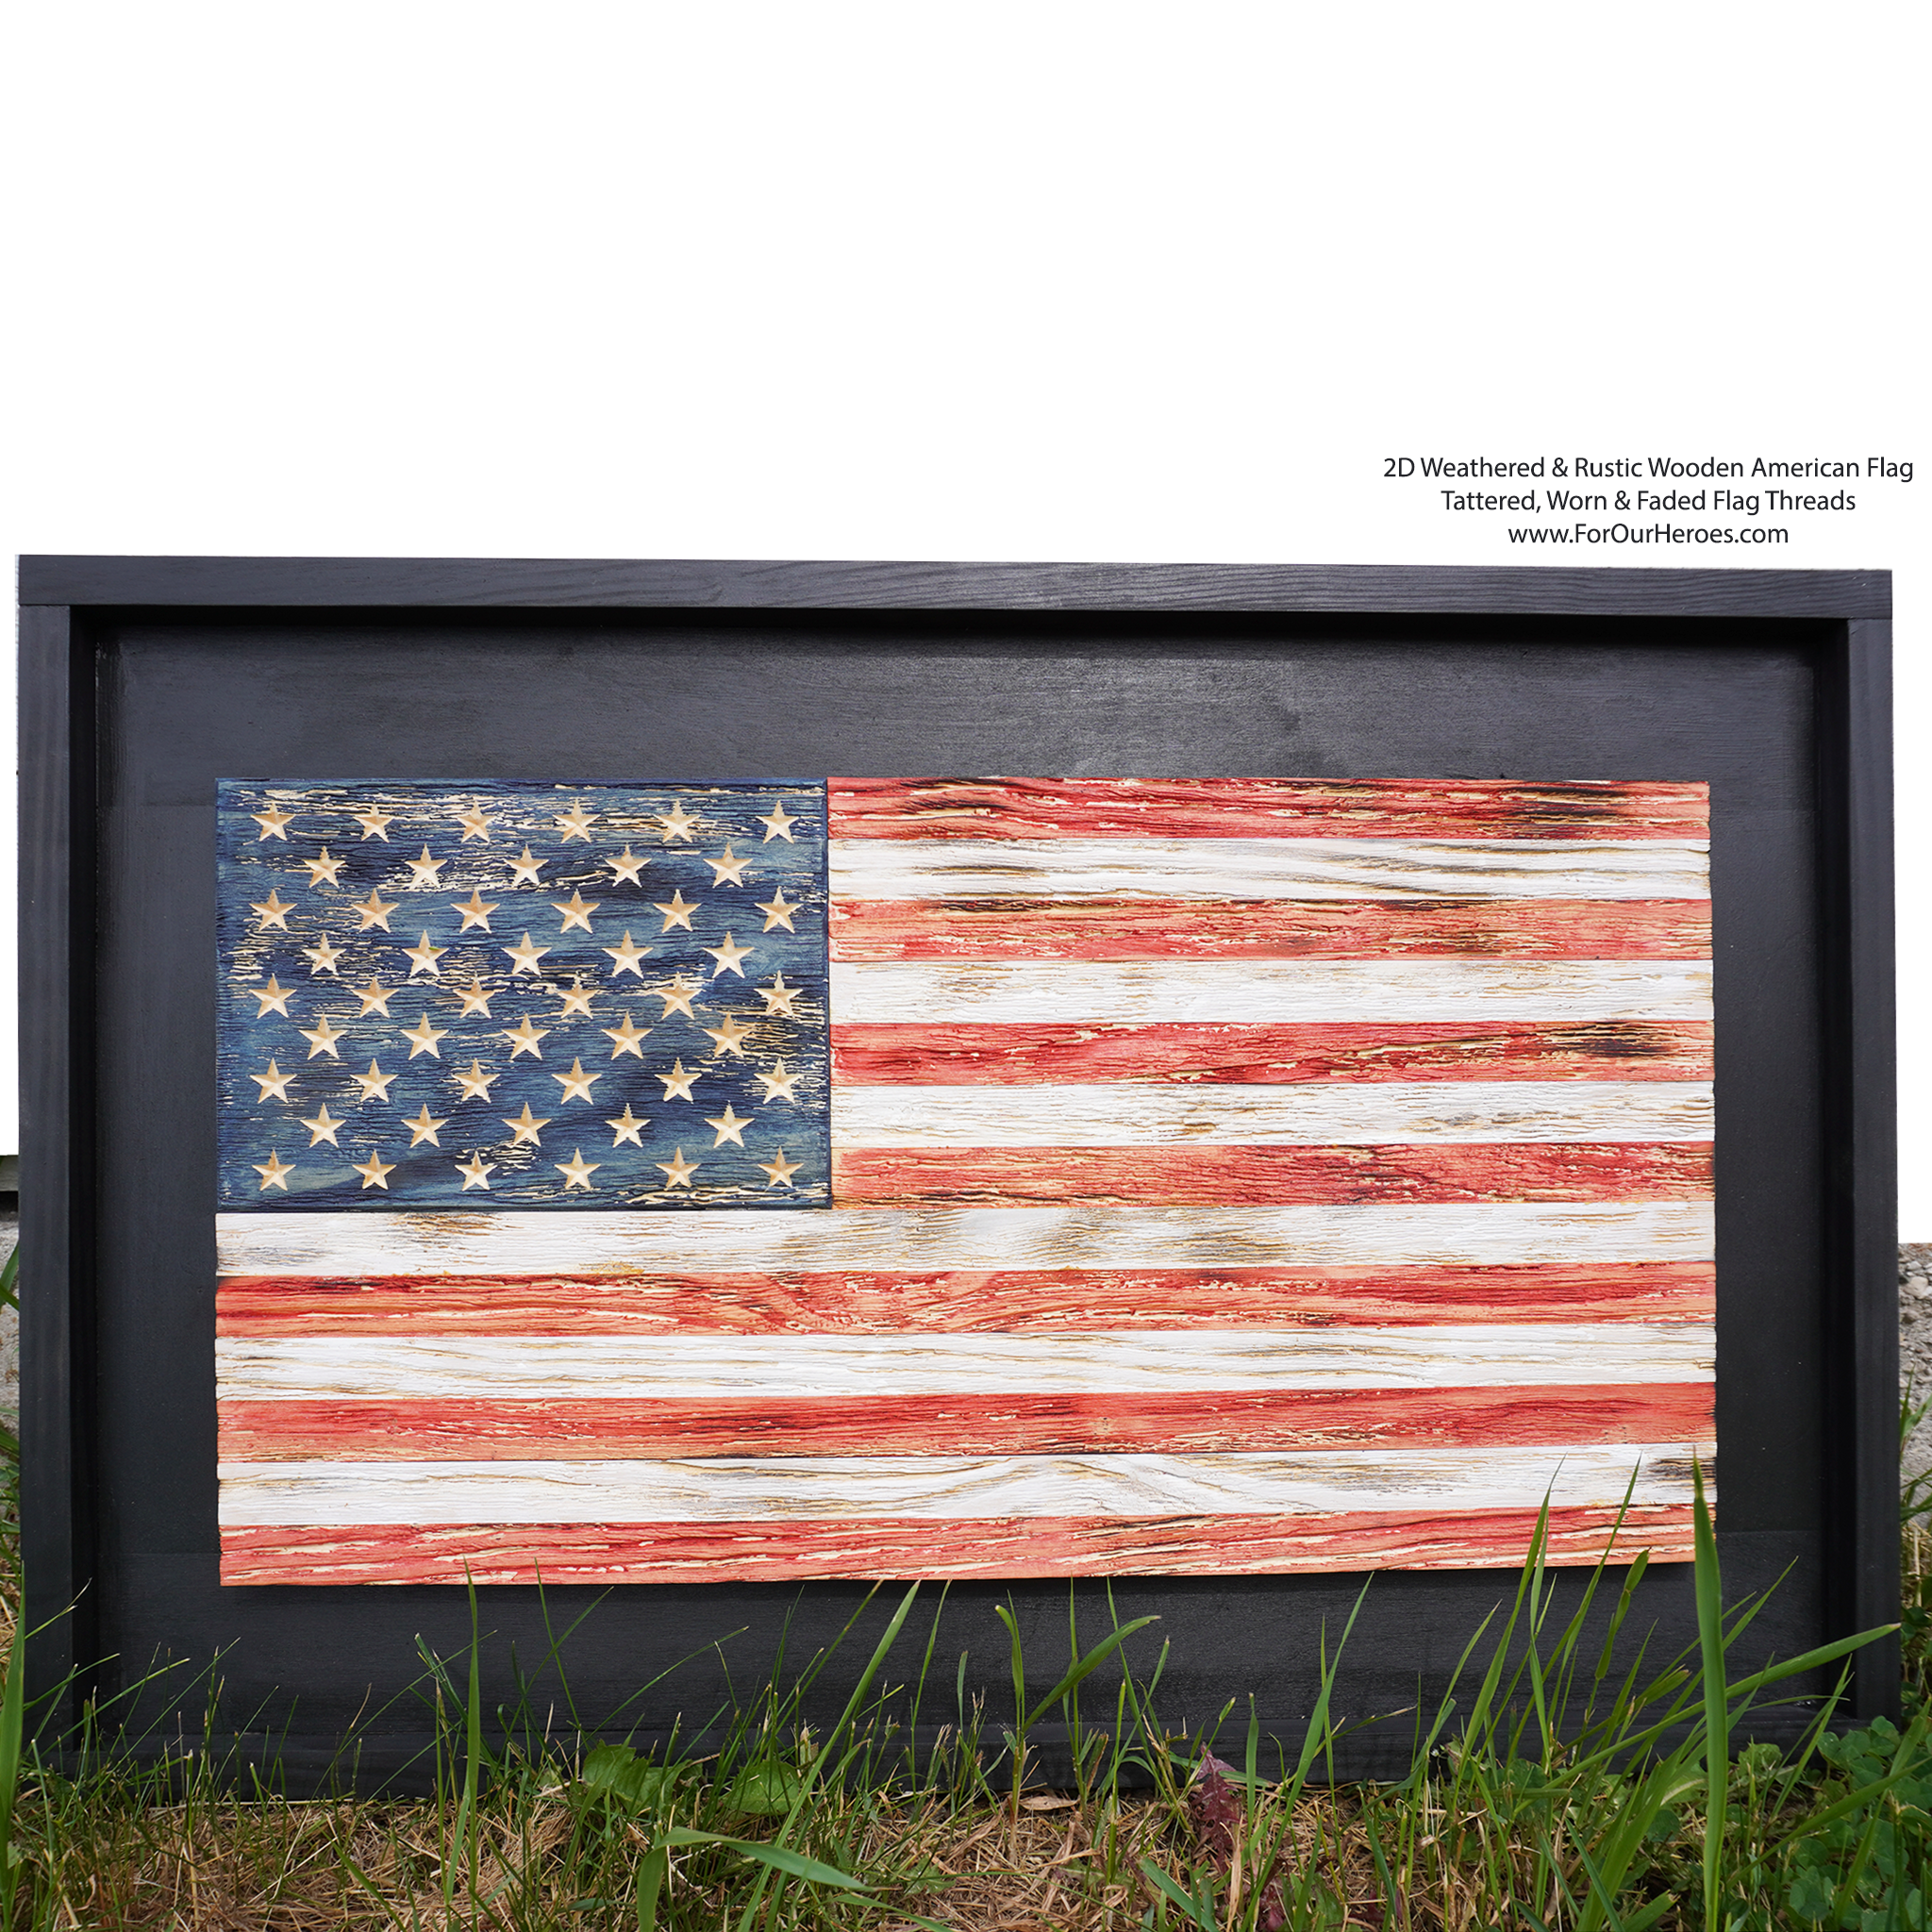 2D WEATHERED & RUSTIC American Flag